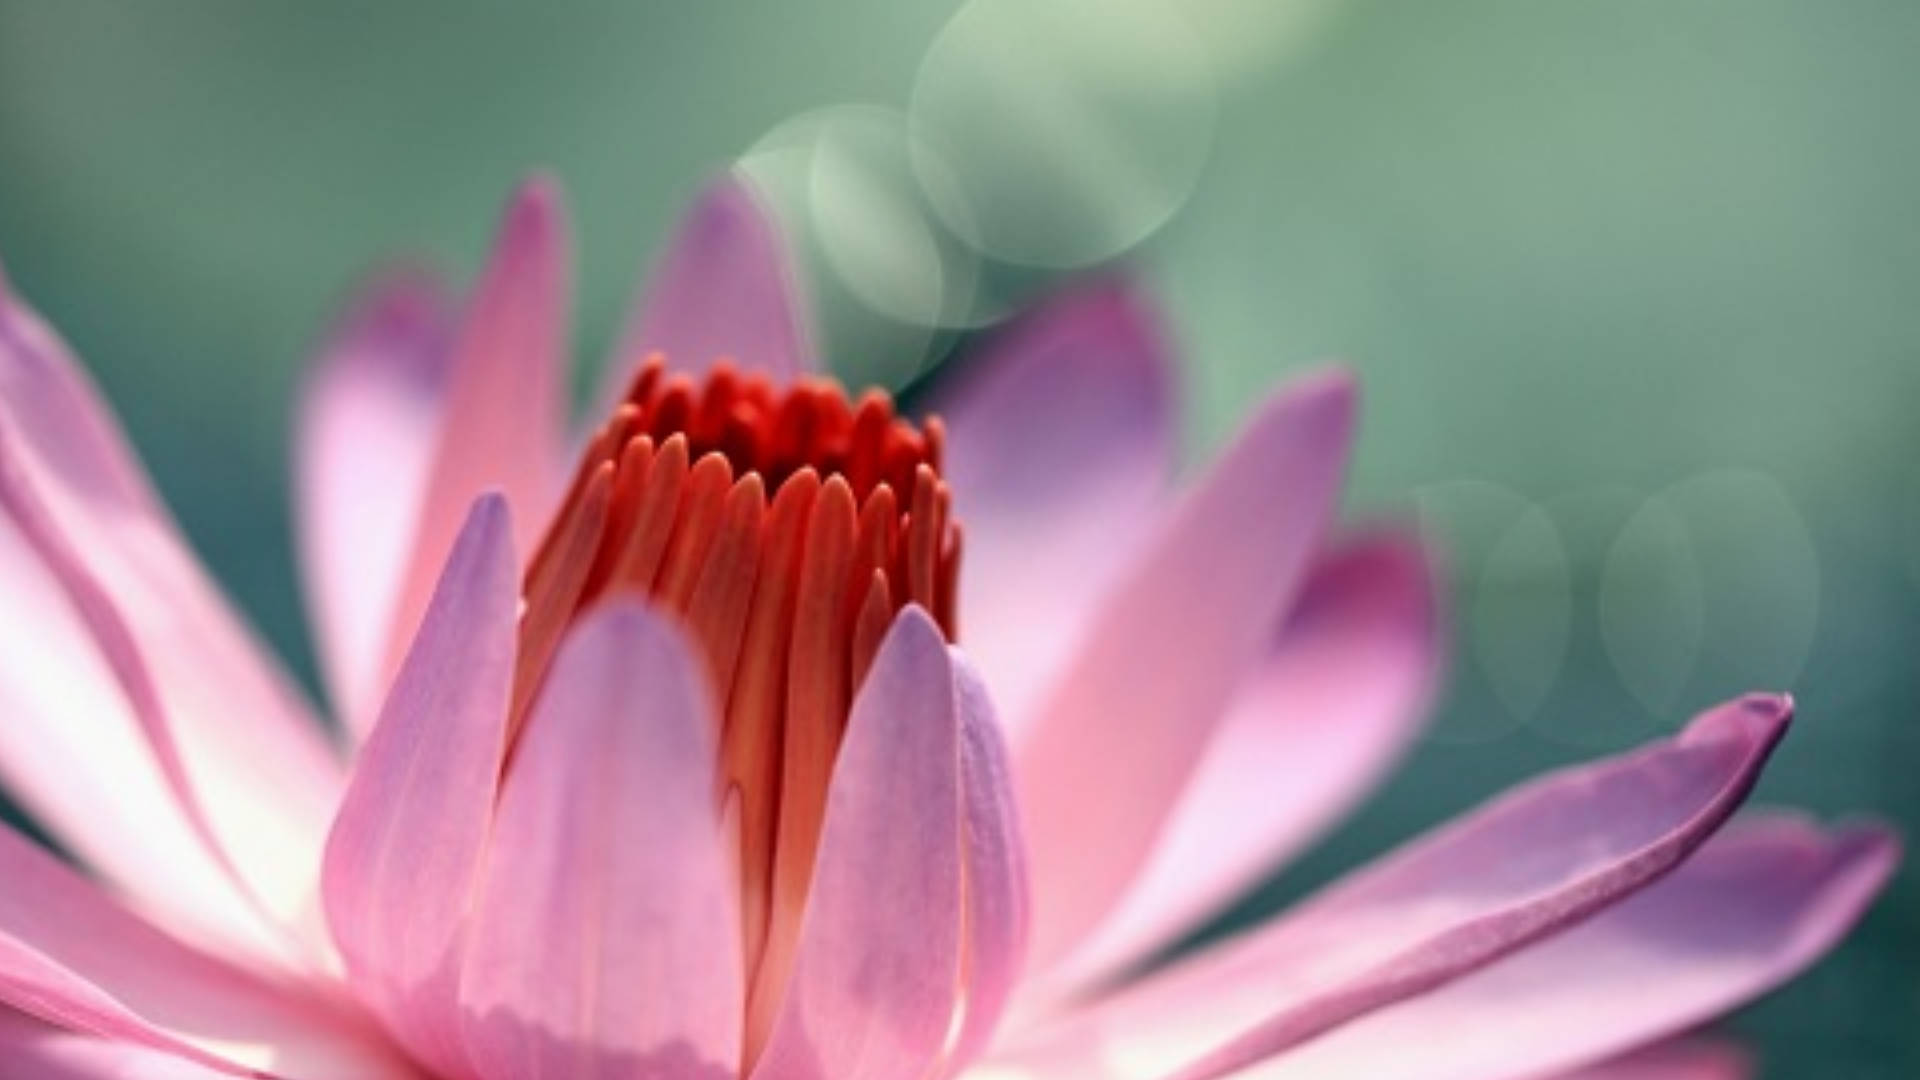 Caption: Blossoming Pink Water Lily Adorning The Tranquil Pond Background